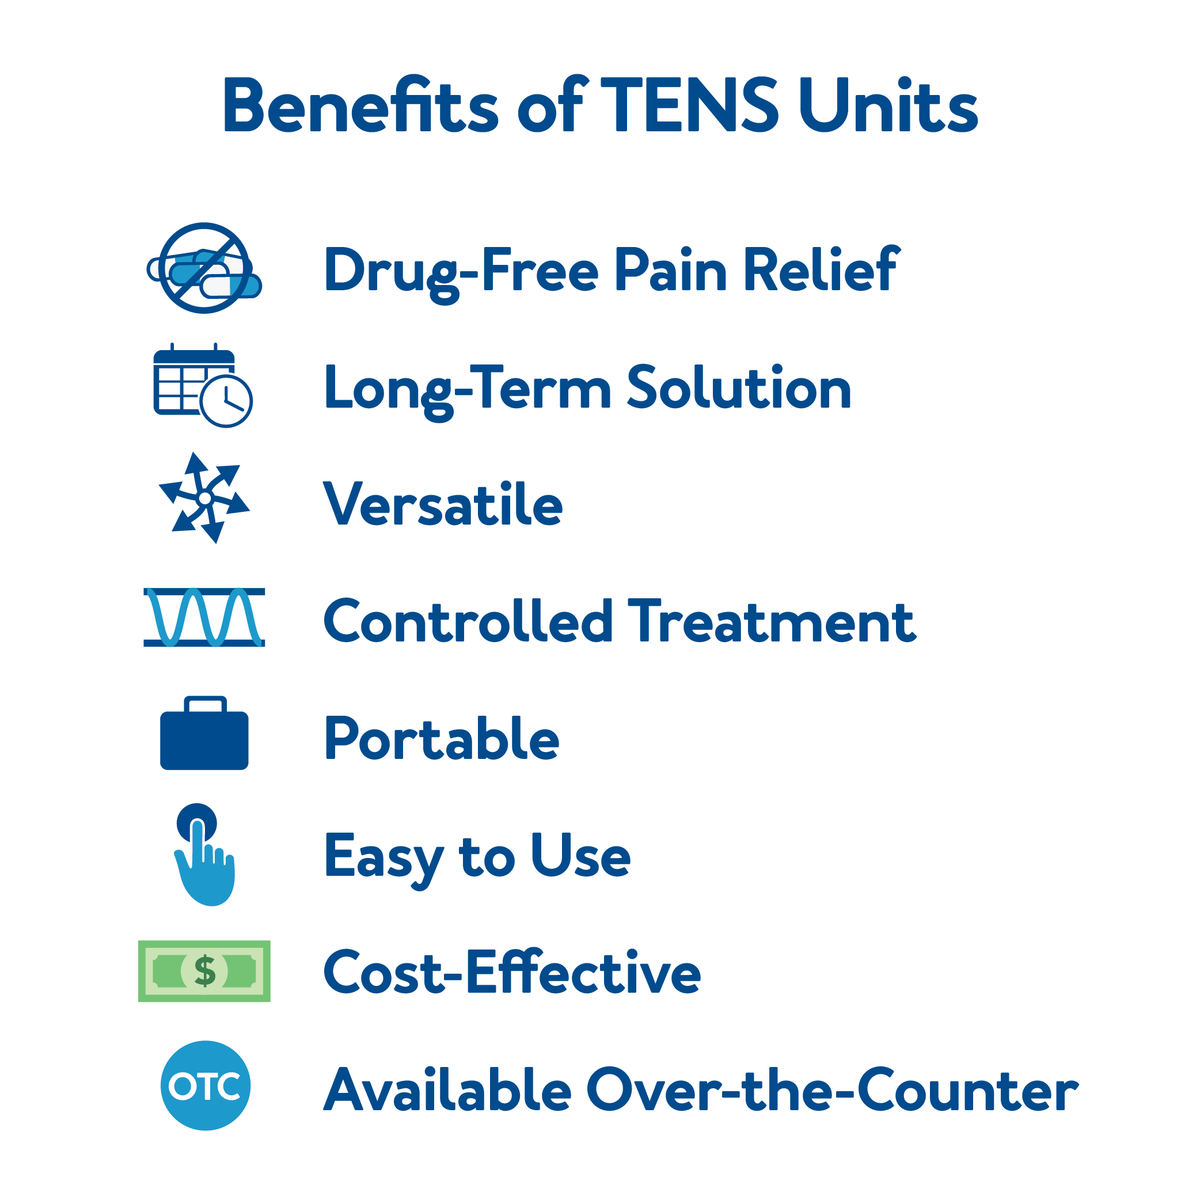 Benefits of TENS Units describe by the the graphic images with text : Further details are provided below